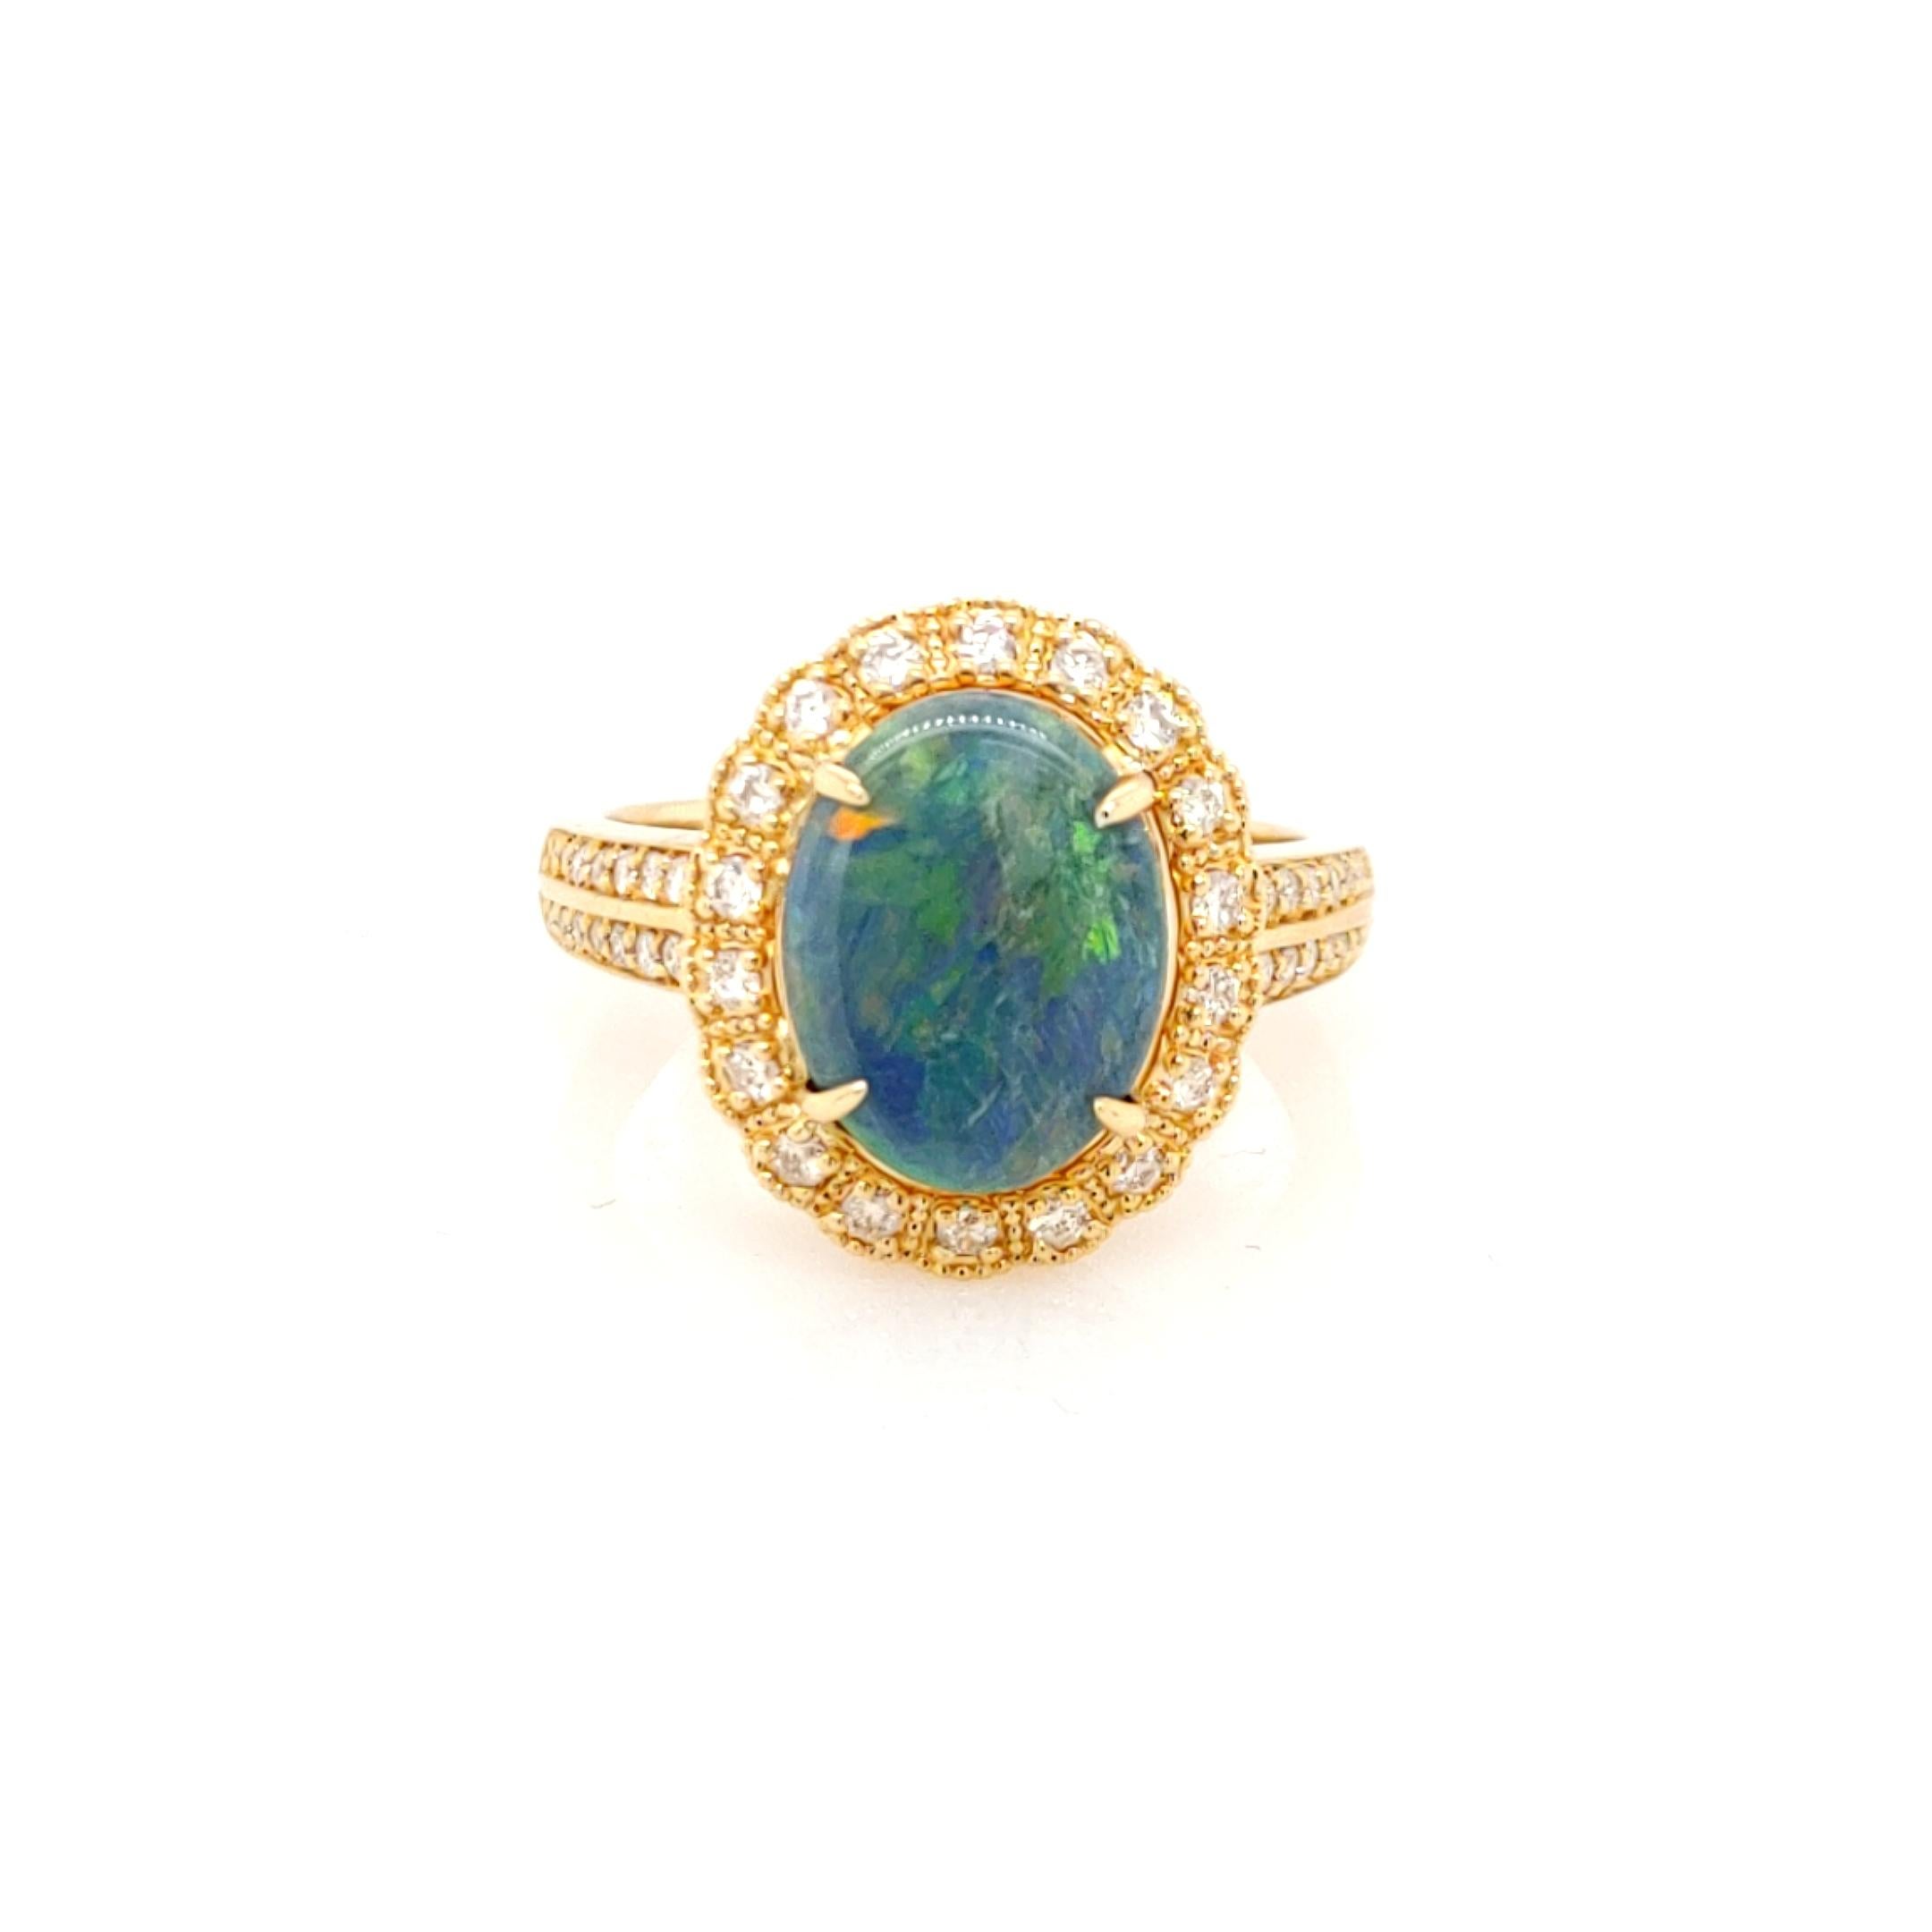 Australian Opal Cocktail Ring 

Lighting Ridge Solid Opal 2.40 Cts surrounded by white diamonds and set in 18K Yellow Gold 

White Diamonds,  0.44 Cts 
18K Yellow Gold, 6.83 Grams